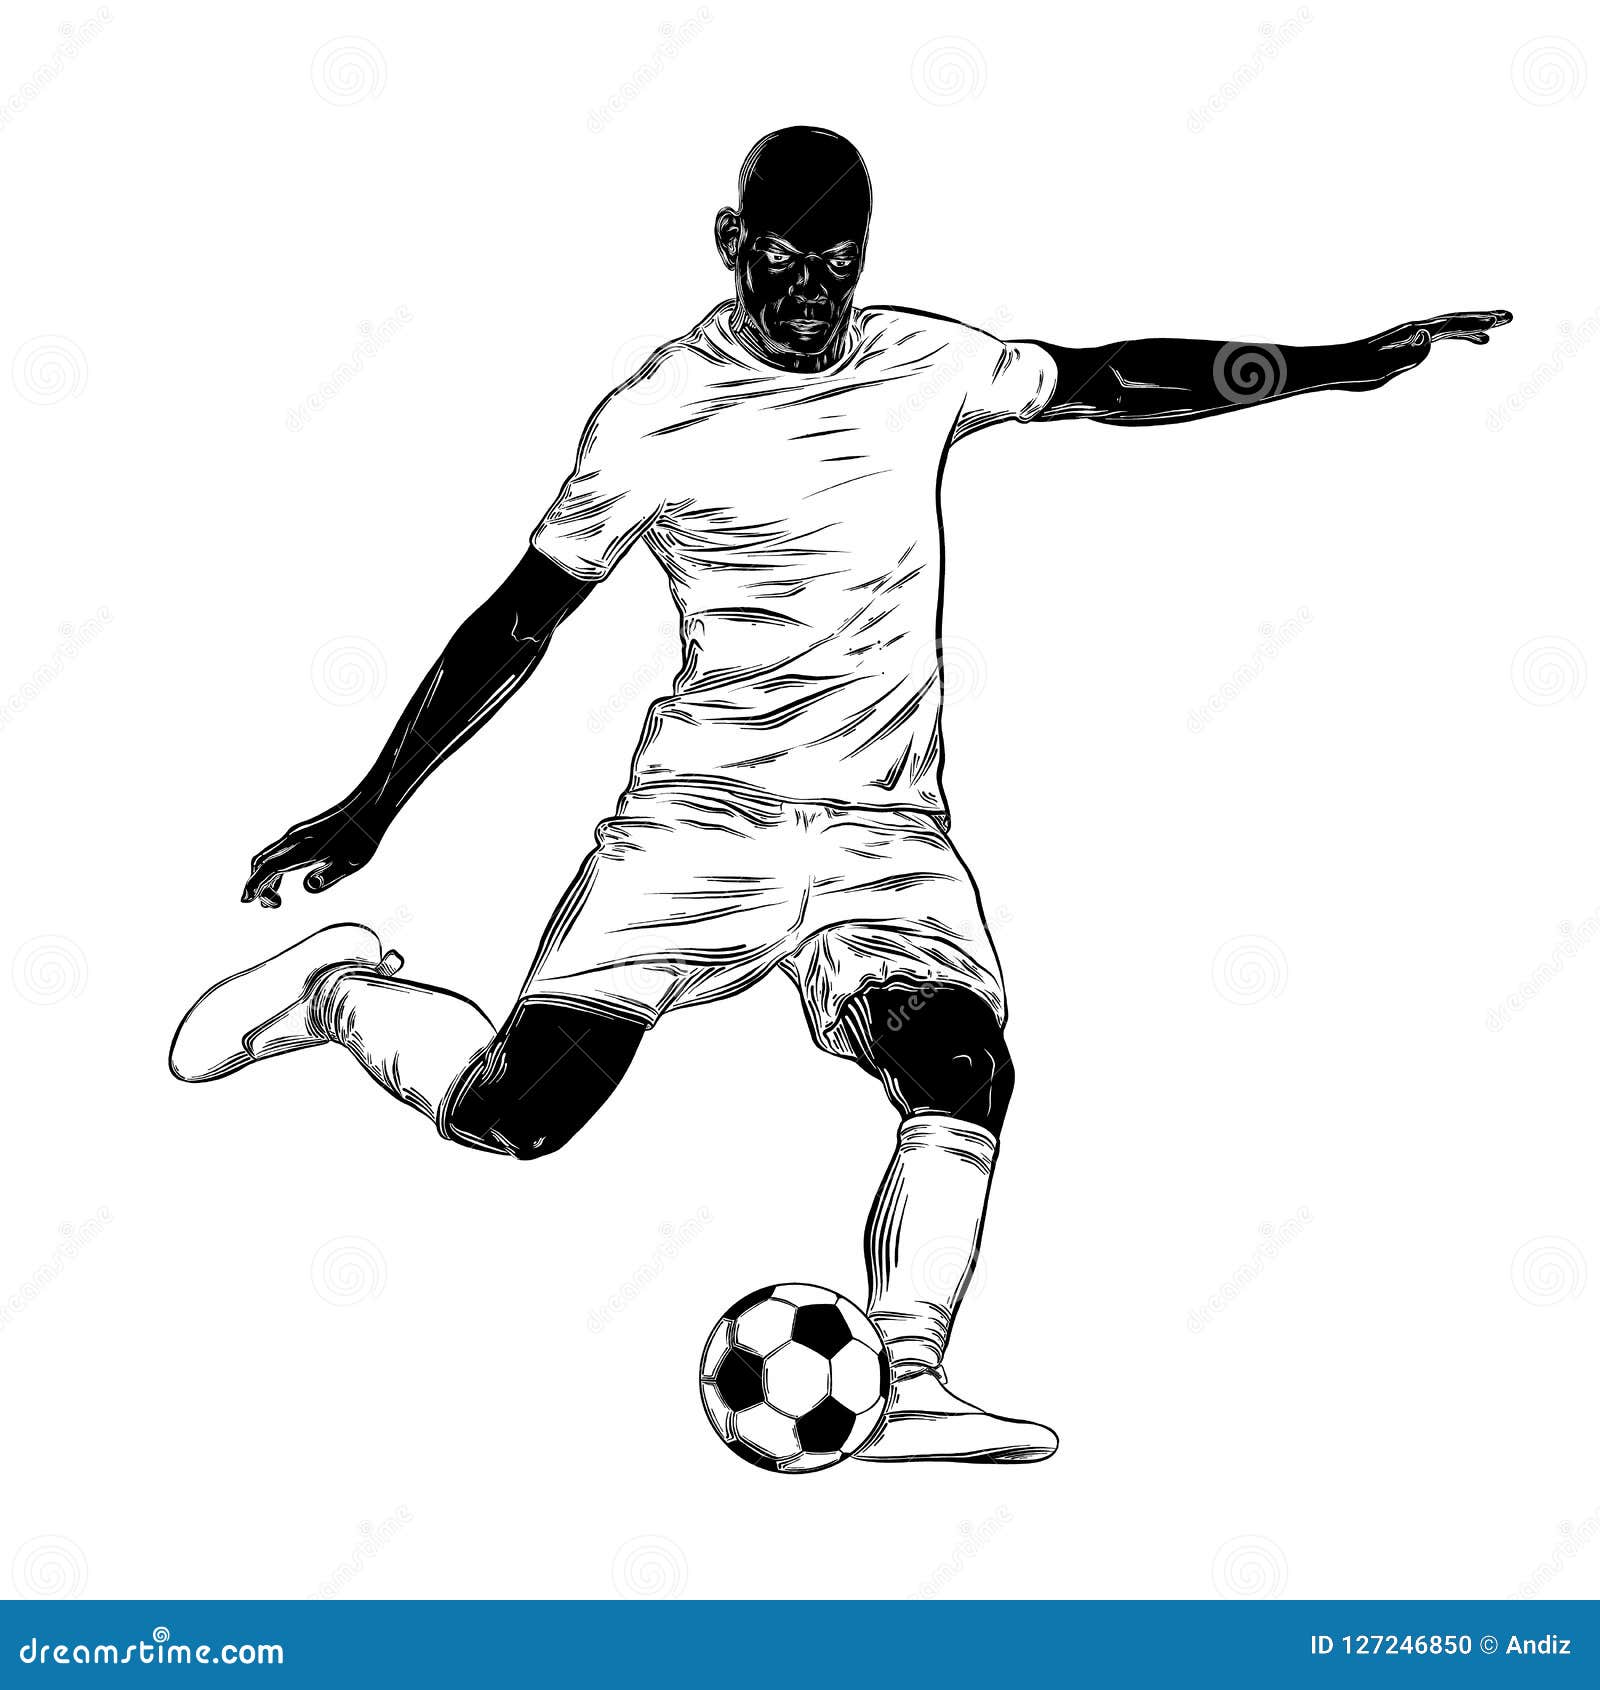 How to draw a Football Playing man | Football Player Drawing - YouTube